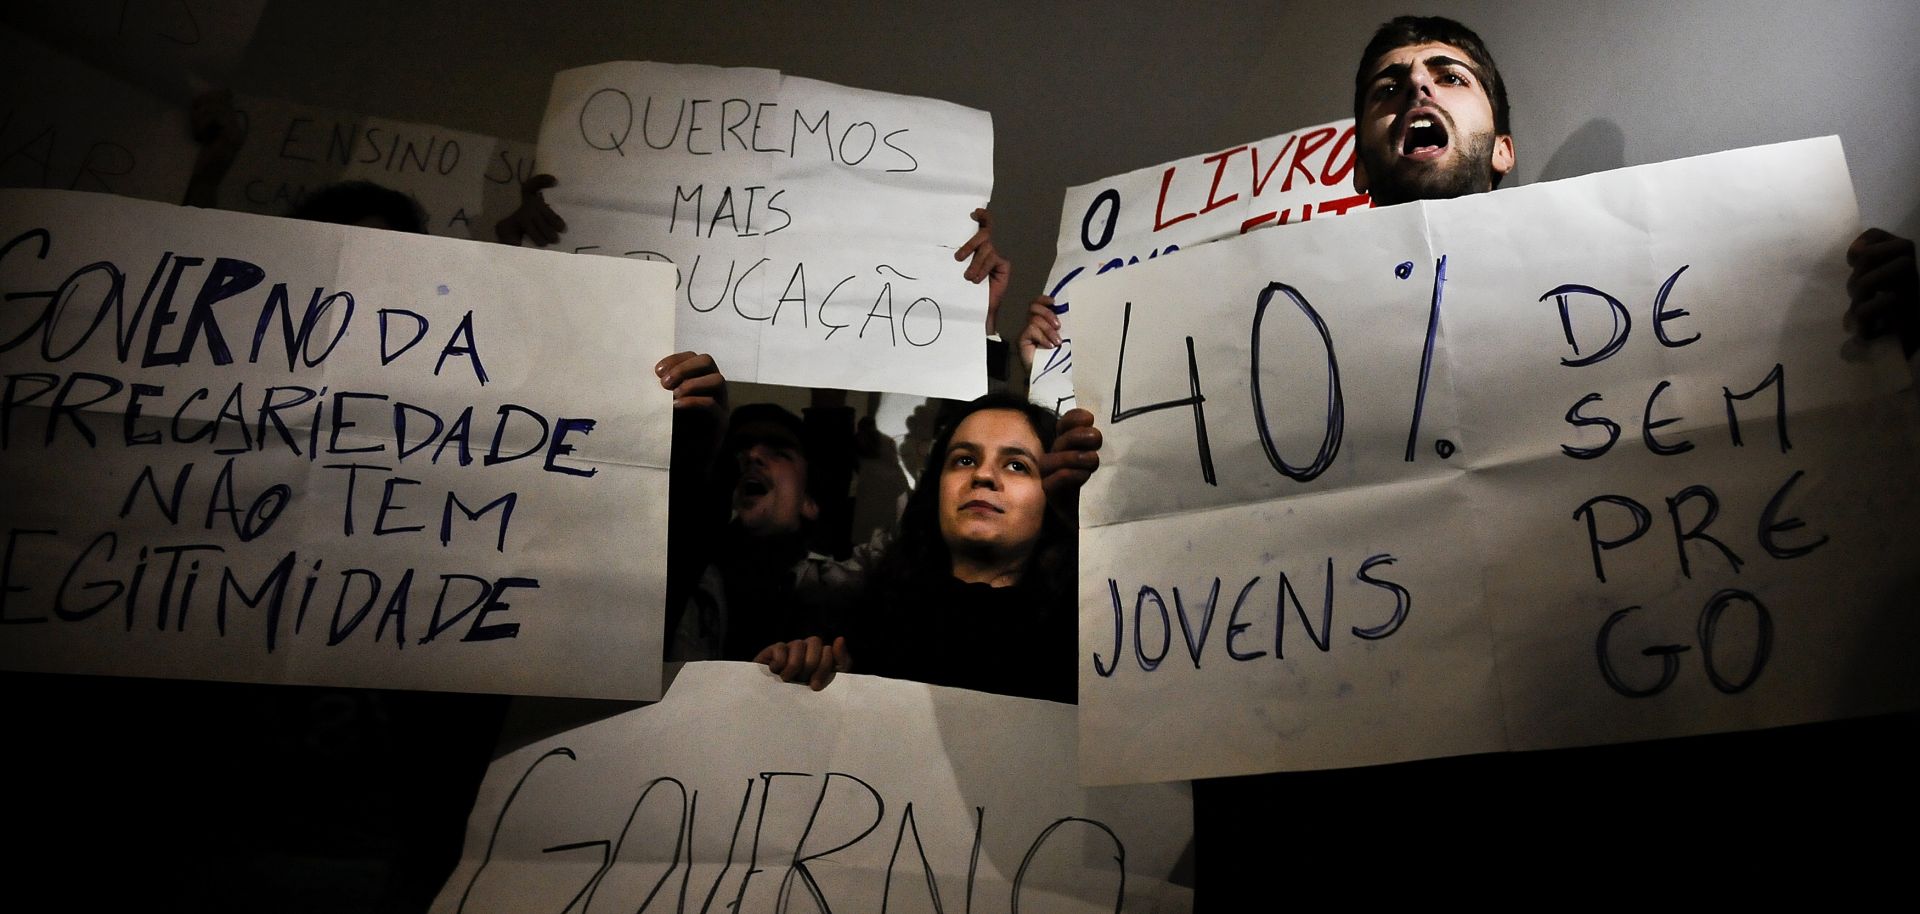 Portuguese students hold signs, including one that reads "Youth unemployment 40 percent," during a protest in Lisbon on Feb. 27.